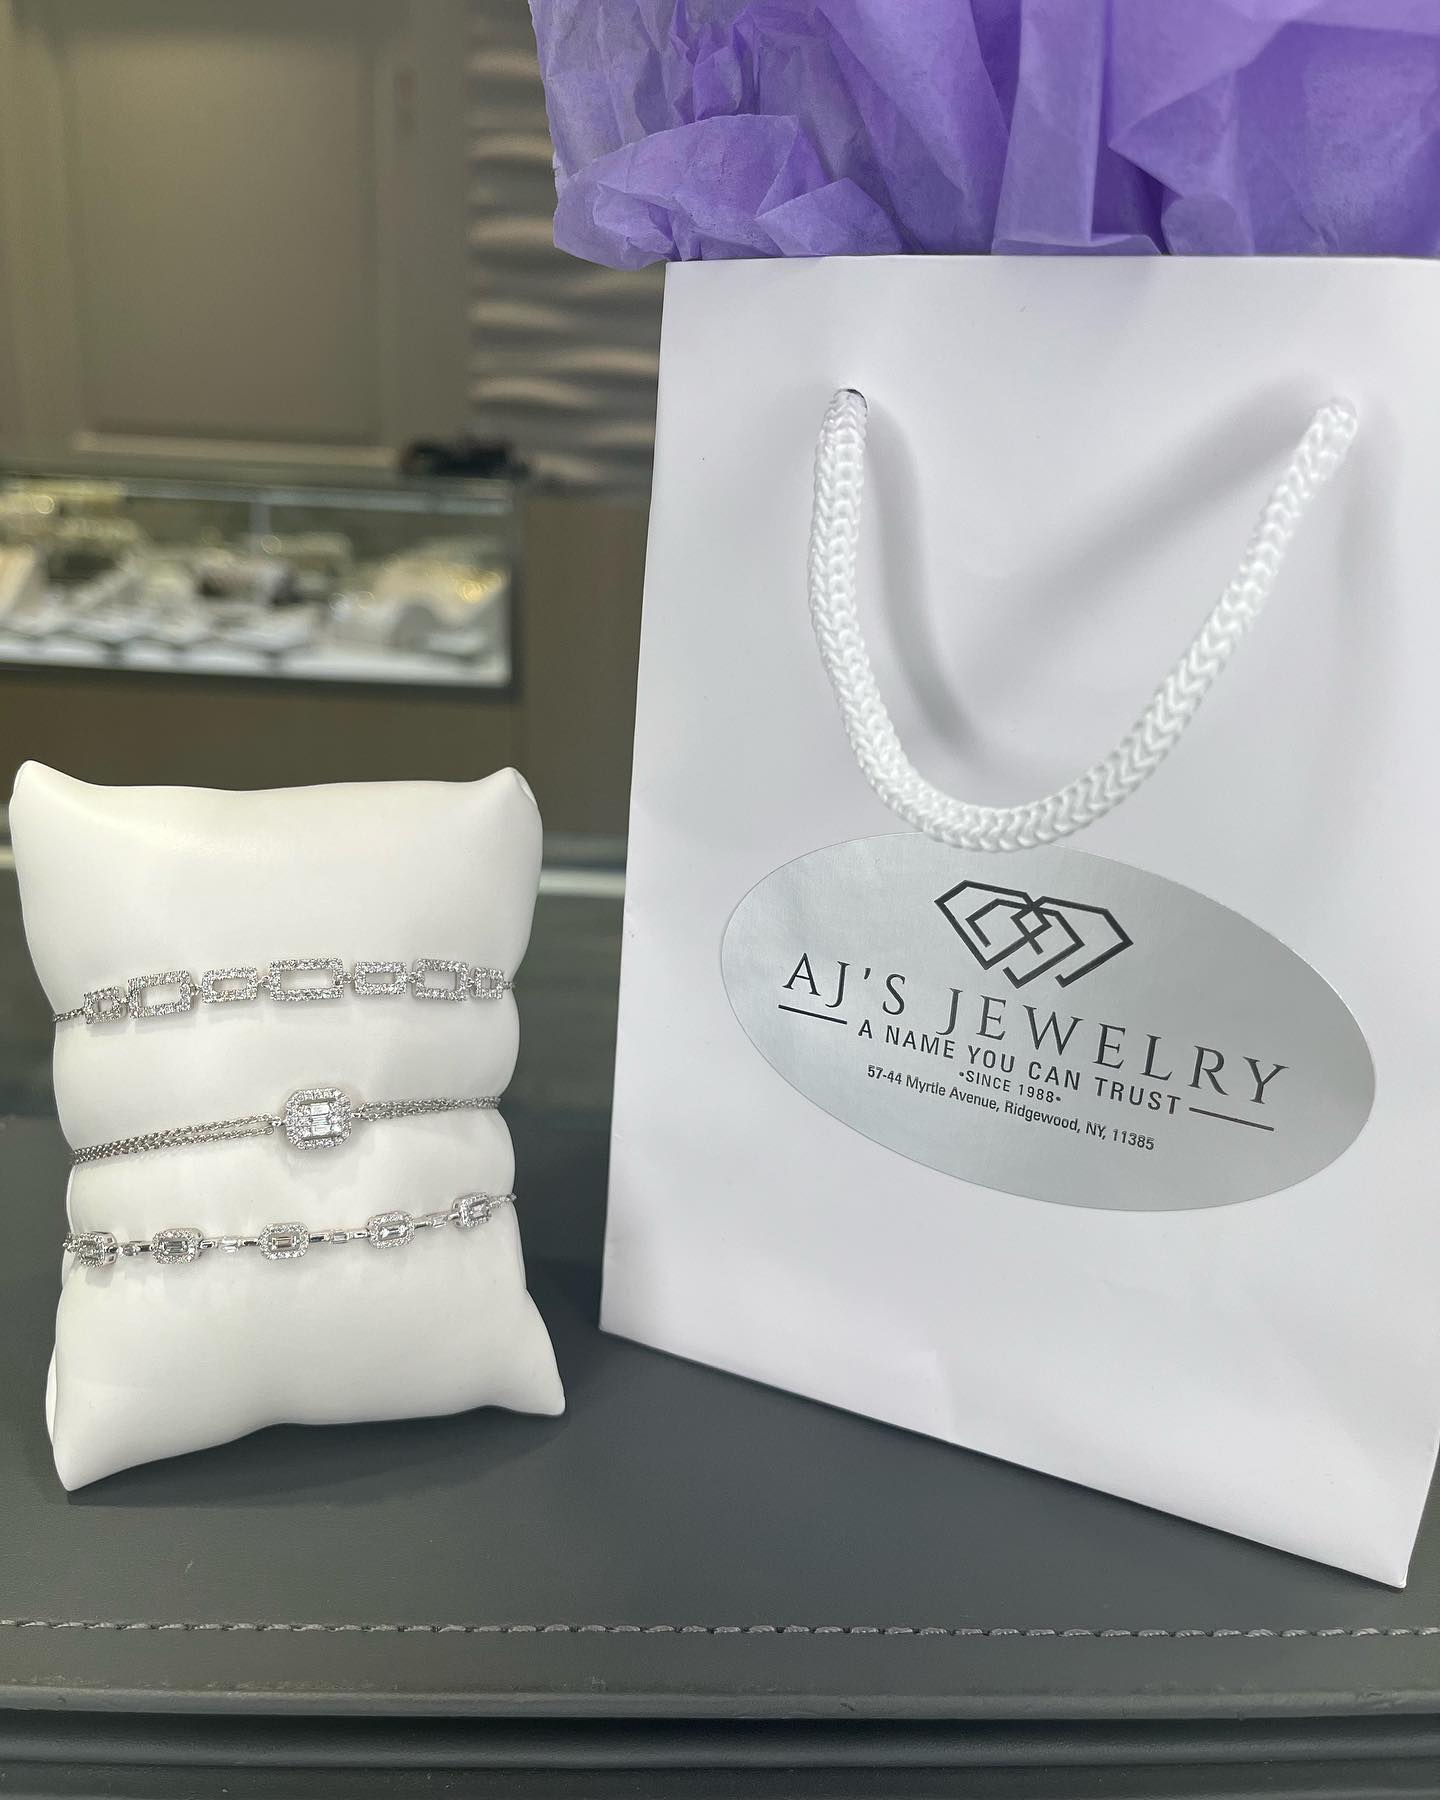 Silver diamond necklace on a white fabric pillow next to the white paper bag